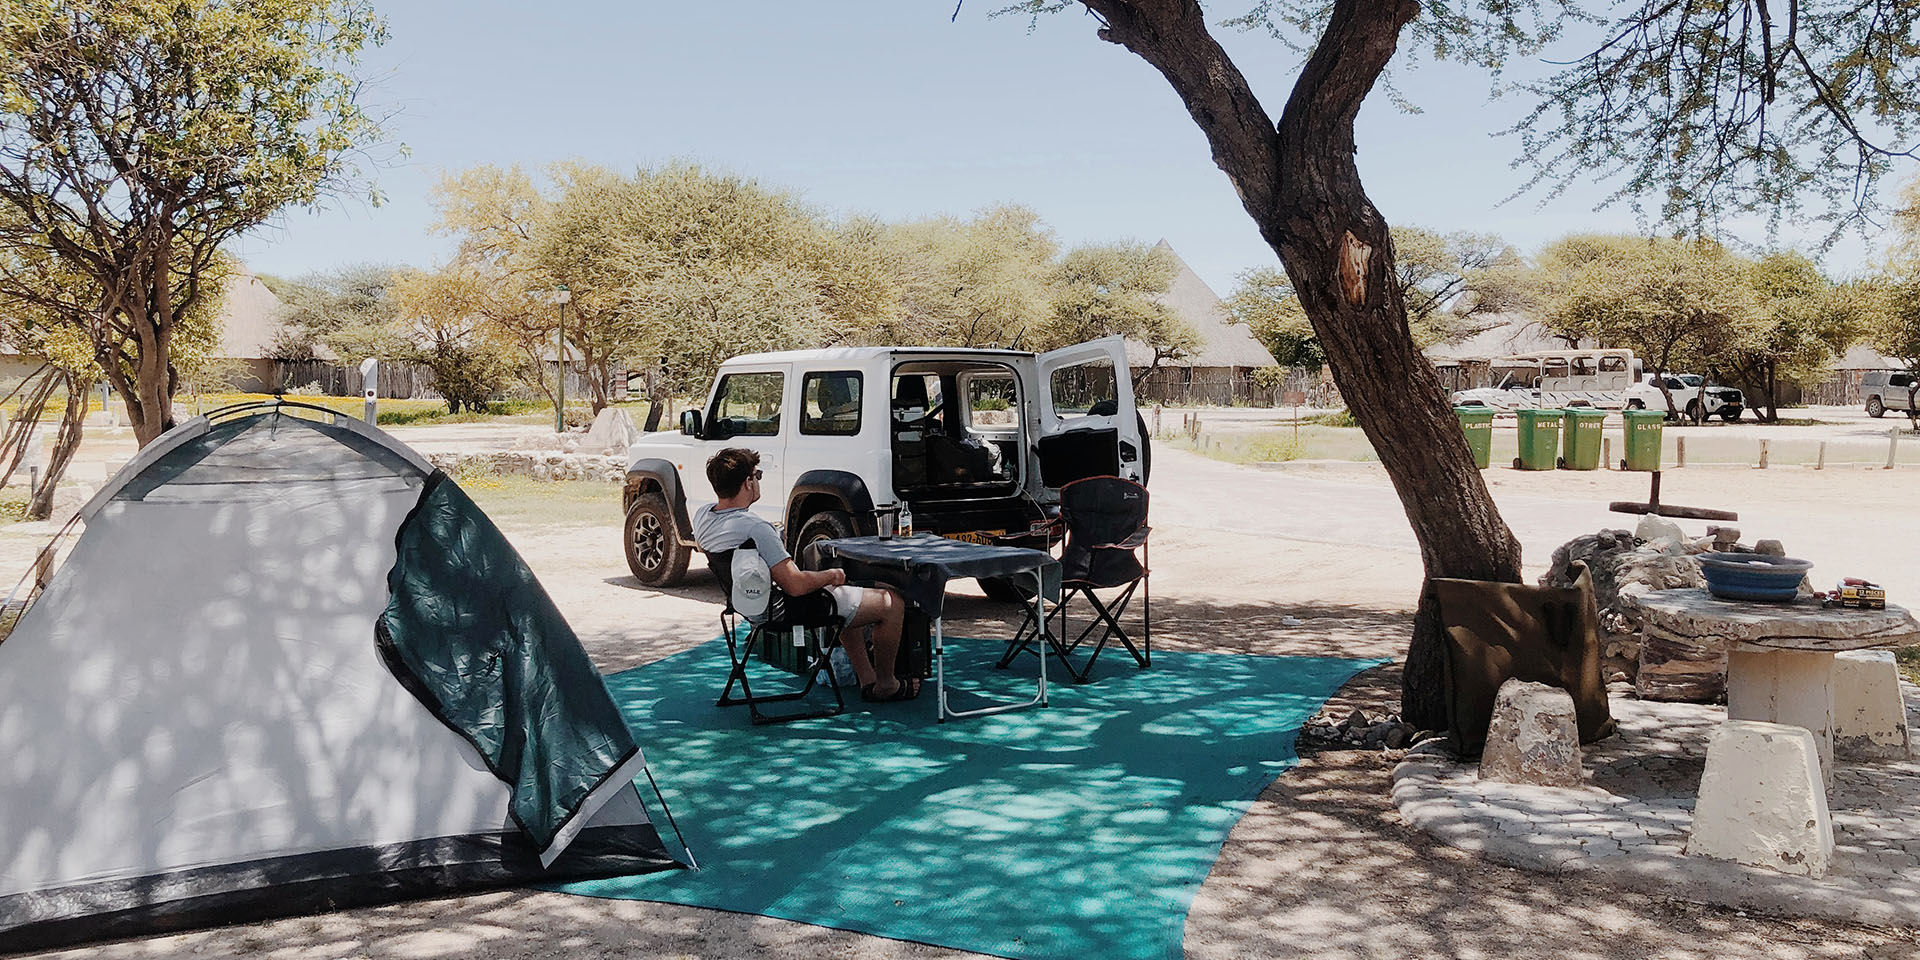 Camping under a tree in Namibia